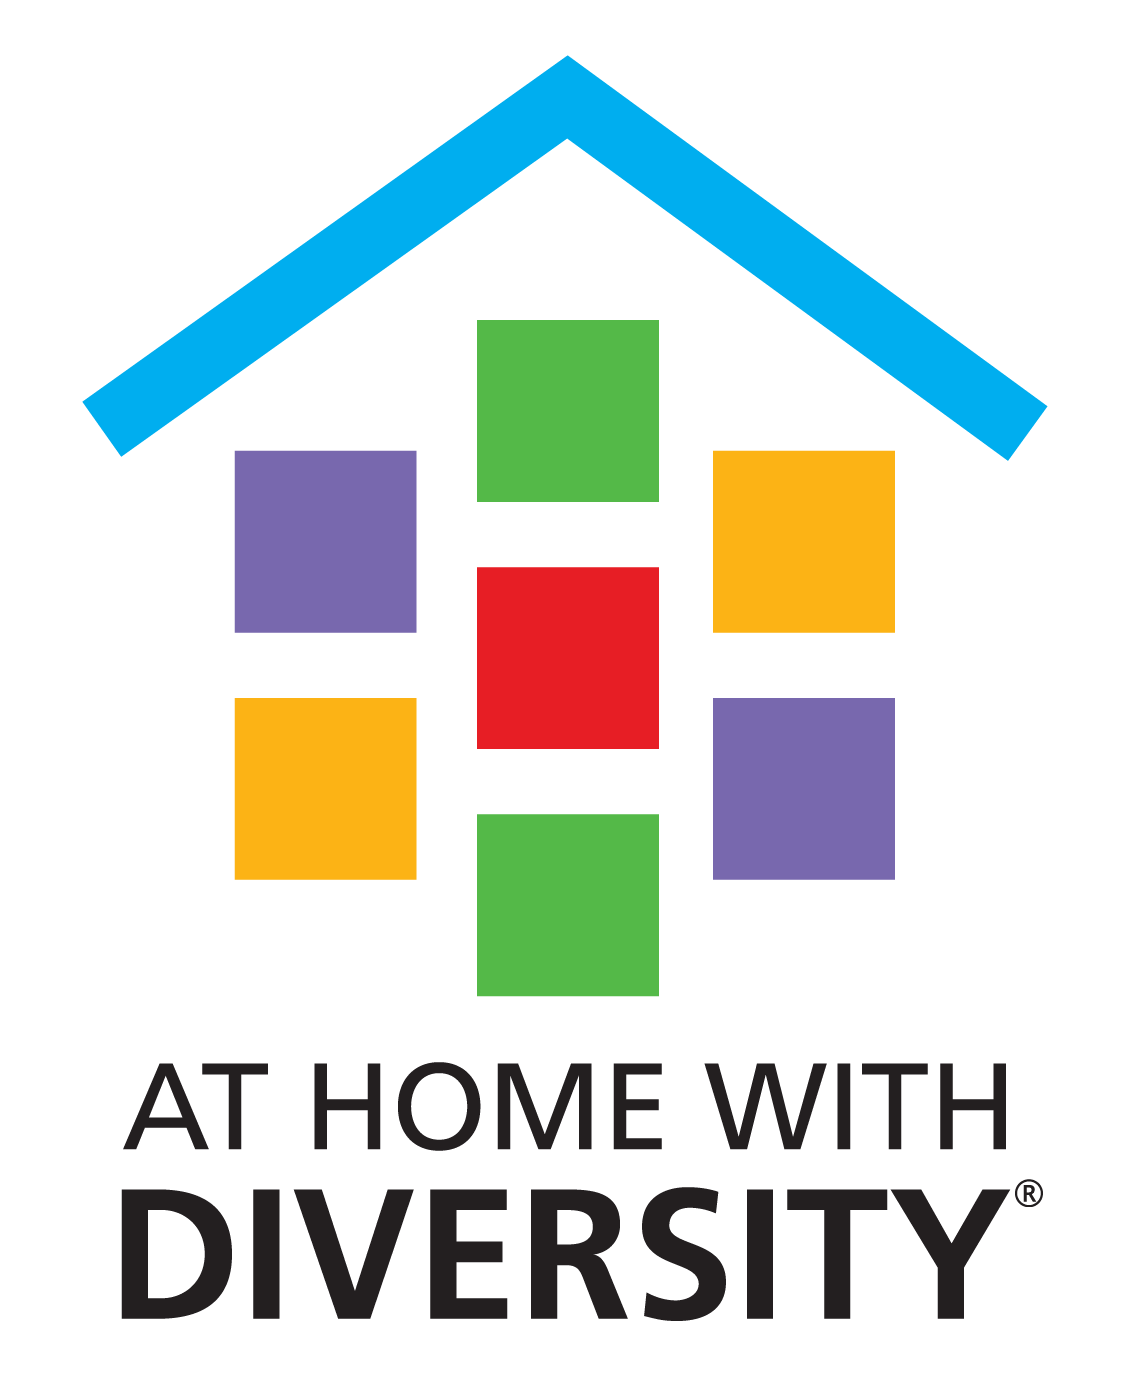 At Home With Diversity®